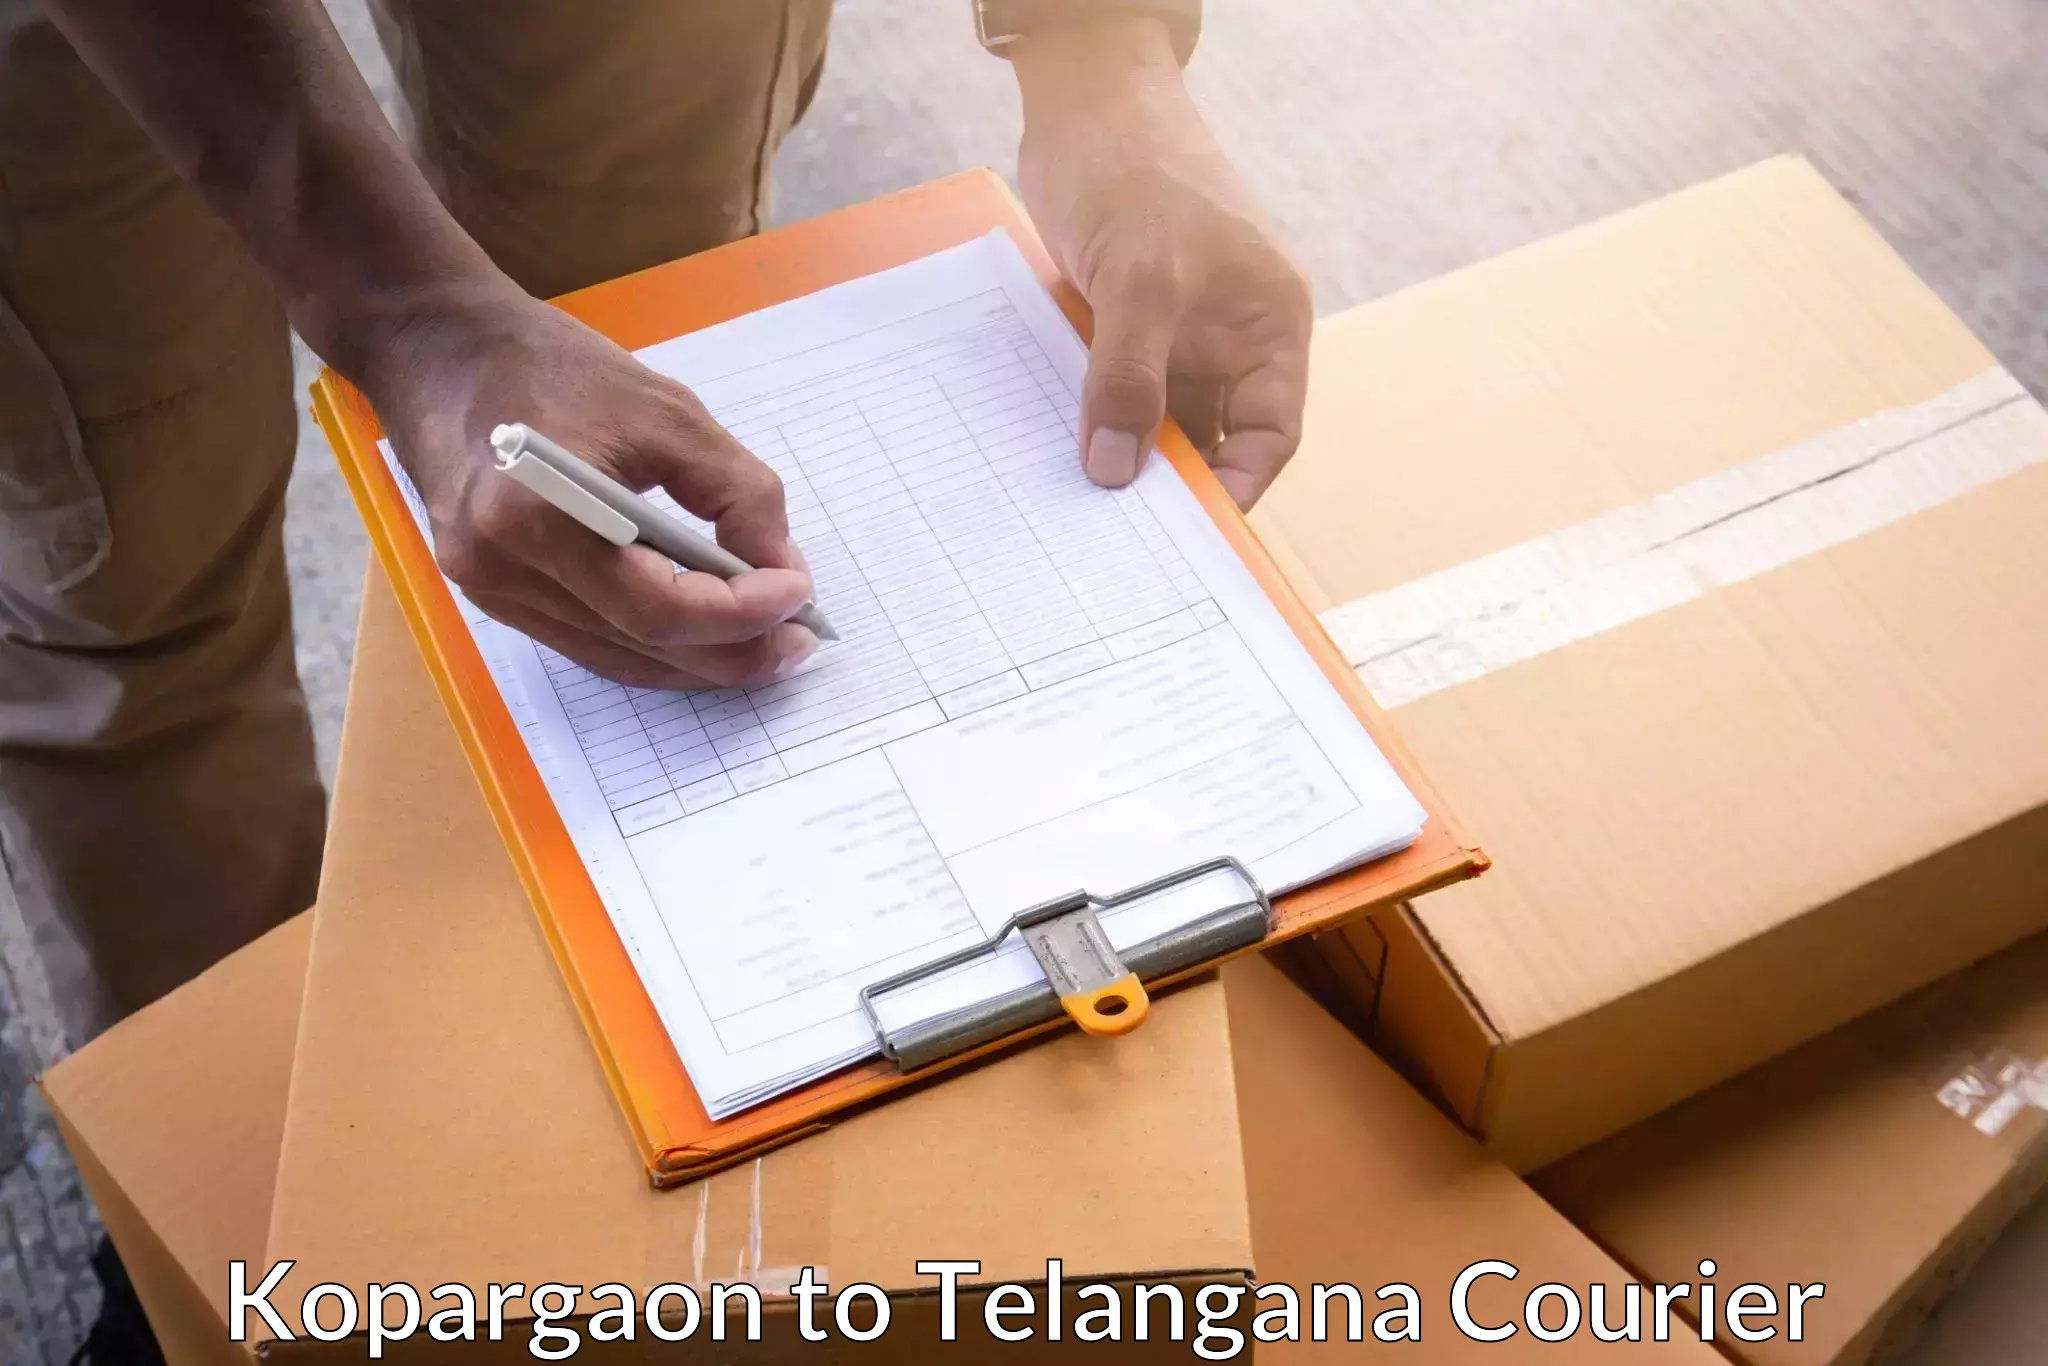 Quick courier services in Kopargaon to Madhira